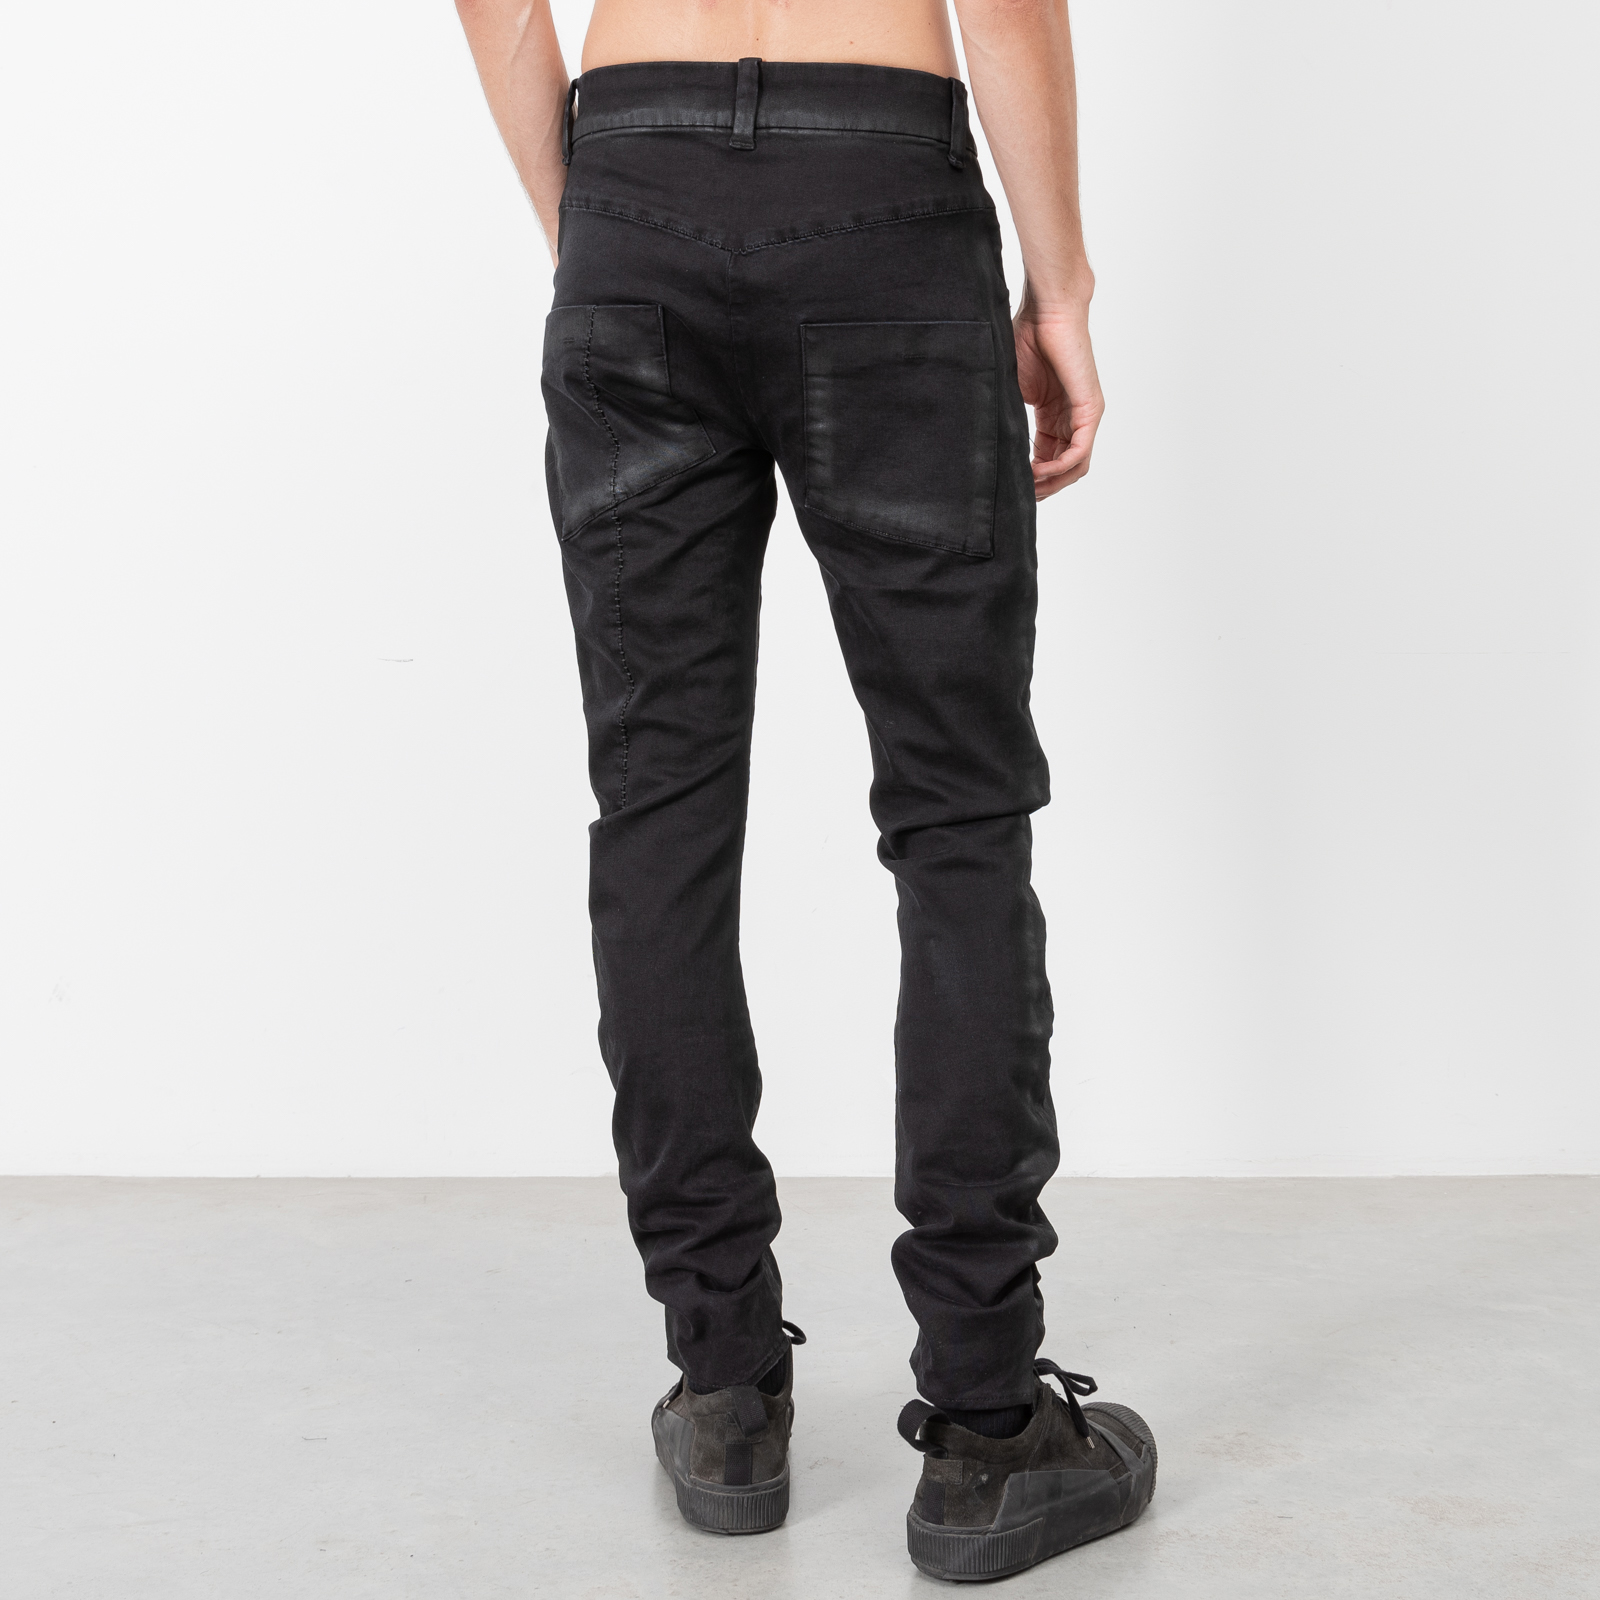 Black waxed jeans